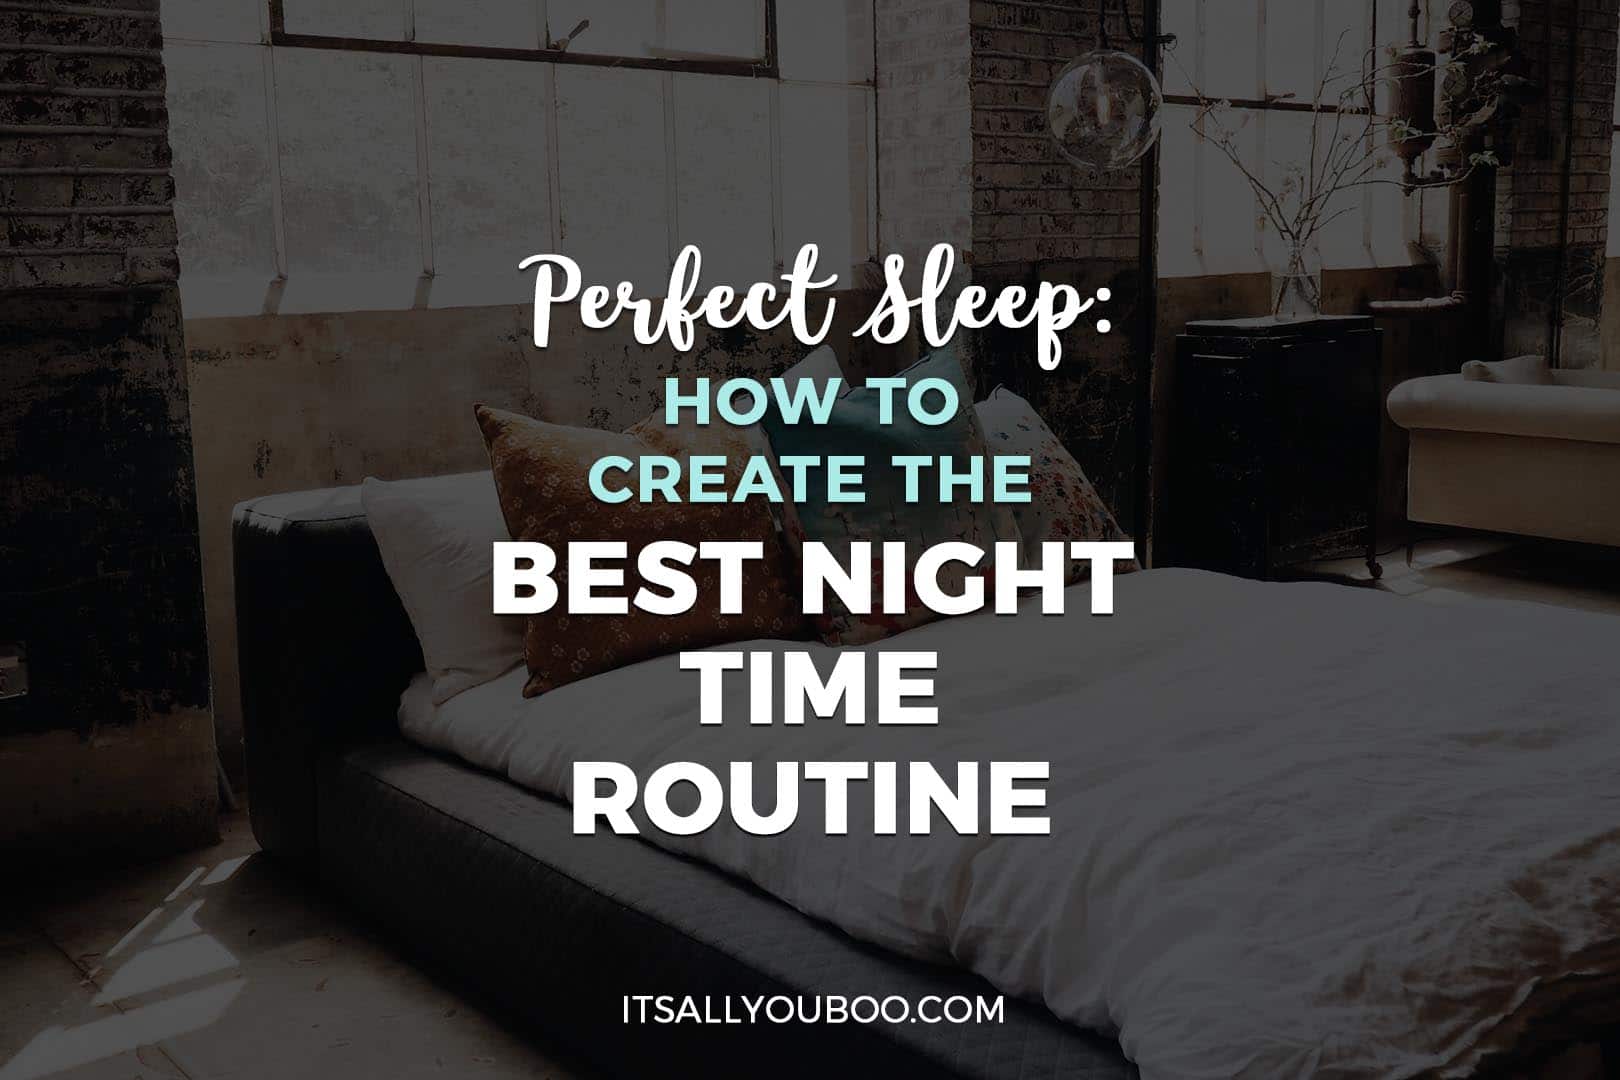 Perfect Sleep: How to Create the Best Night Time Routine